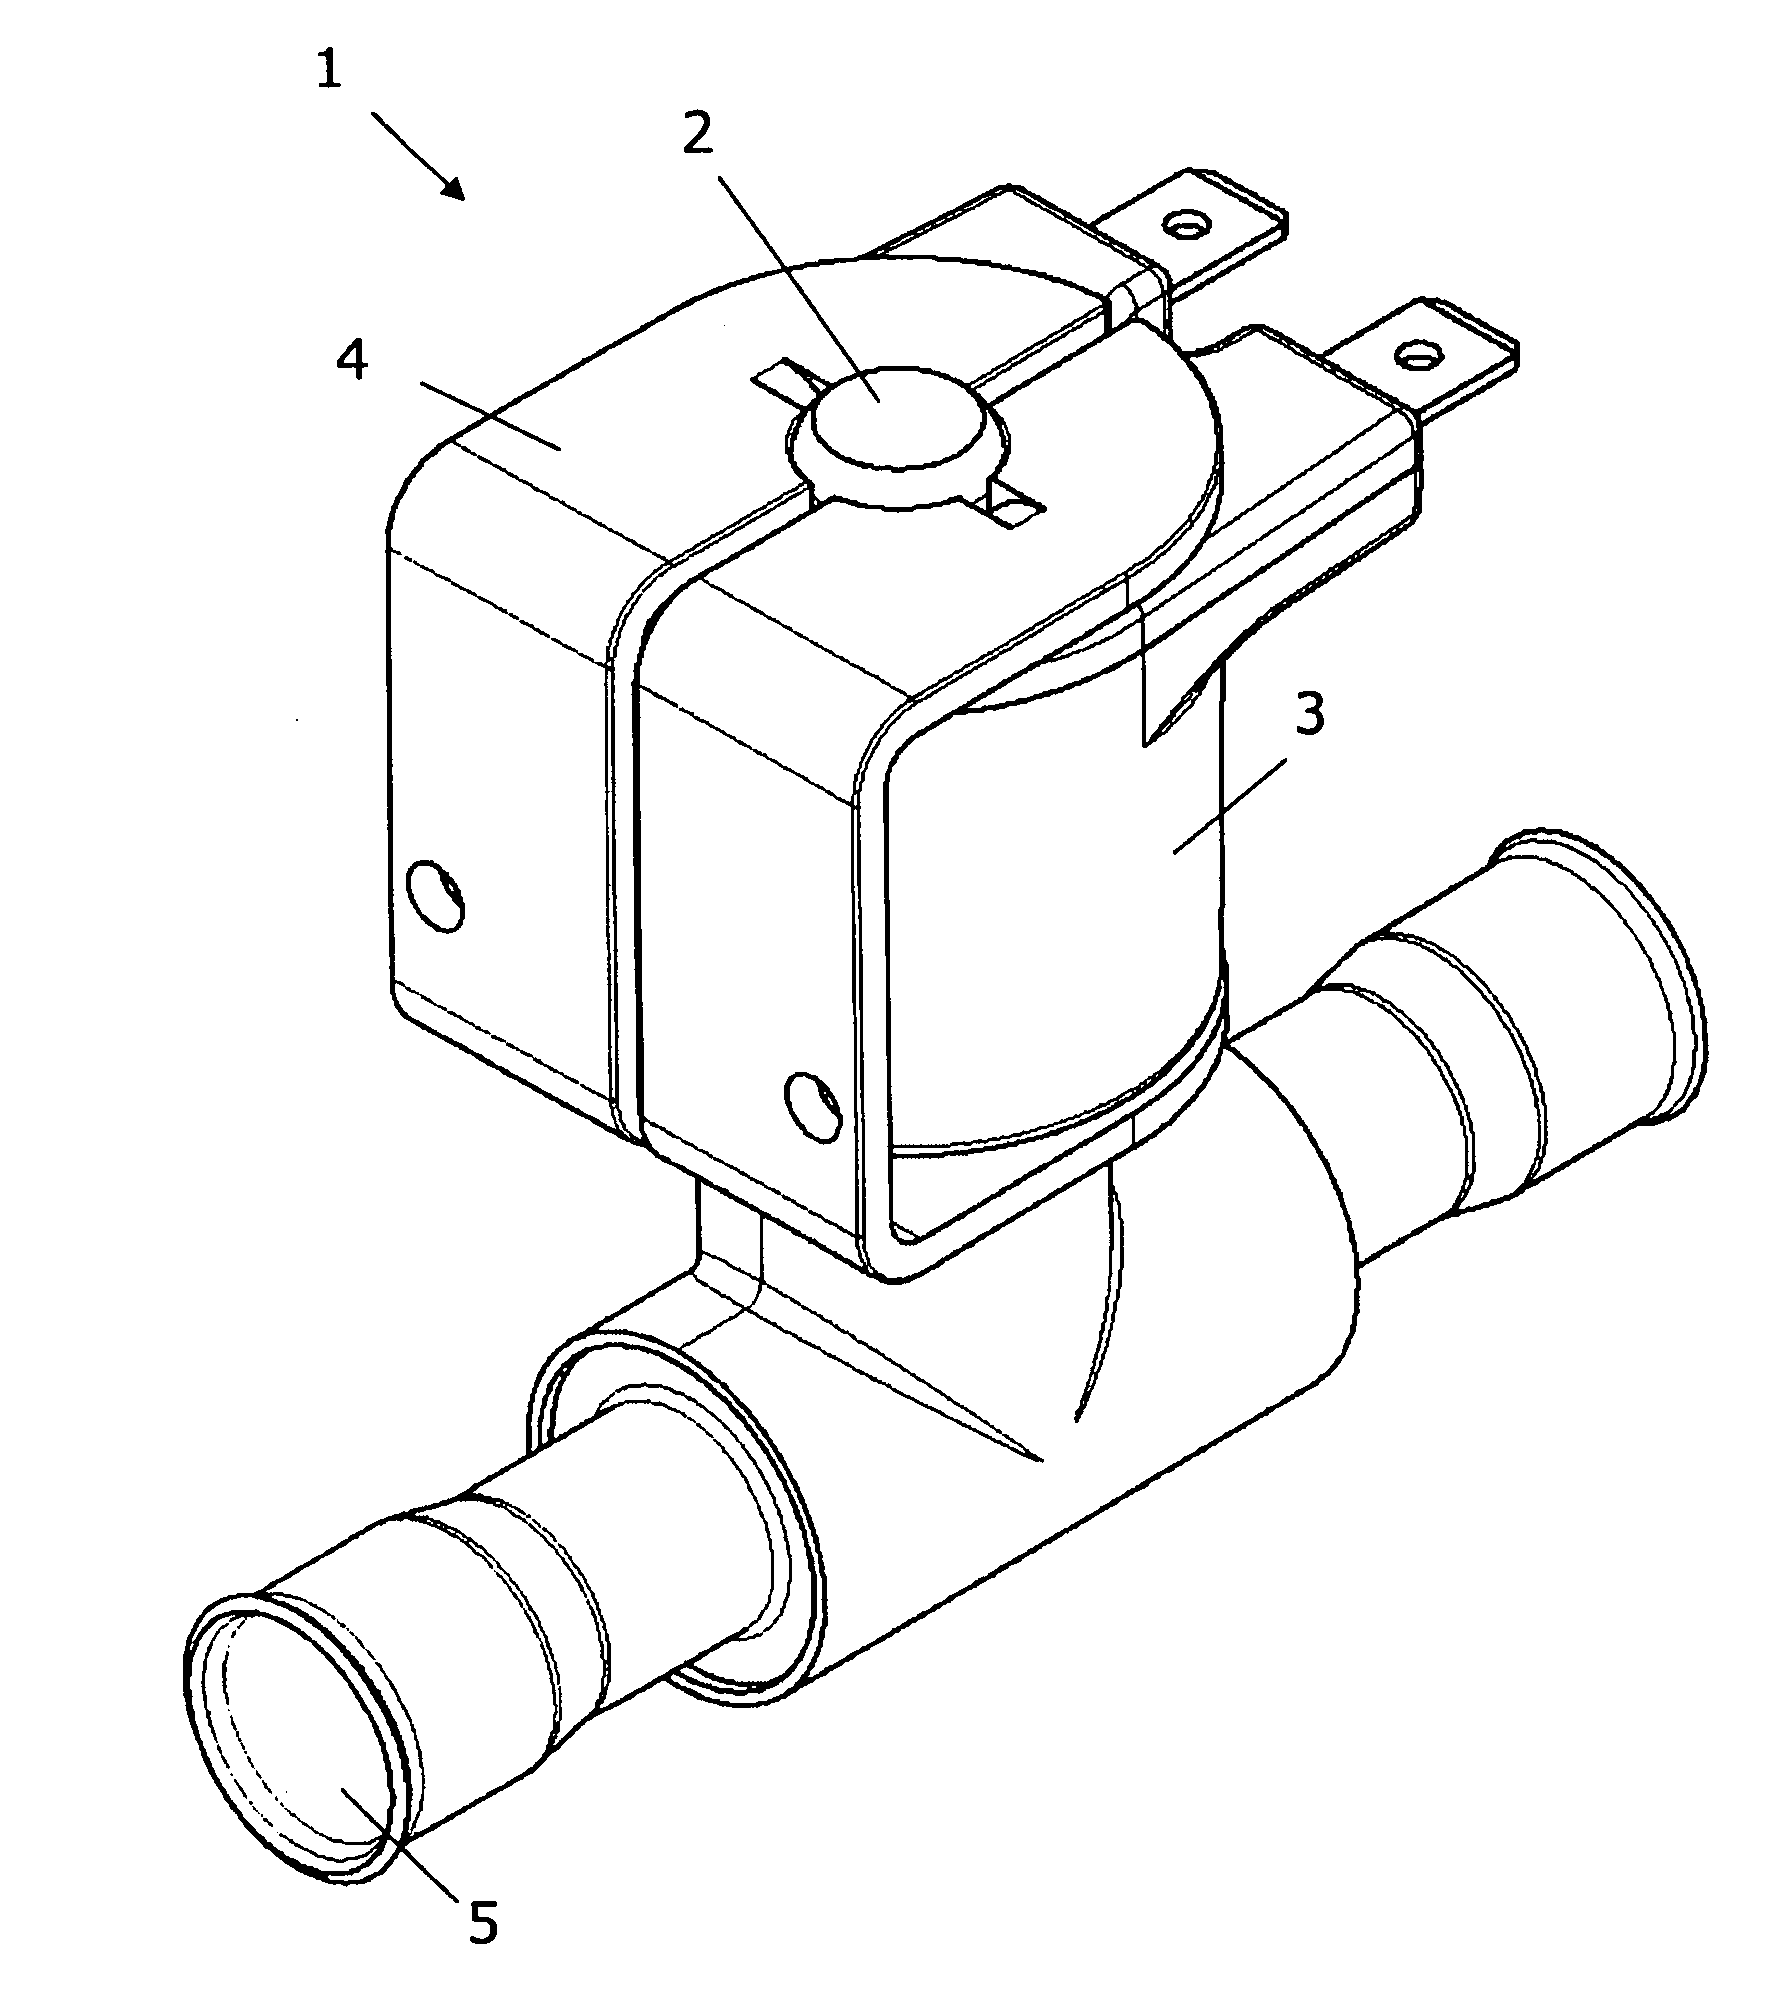 Valve with a solenoid fixed to a plunger tube by a yoke